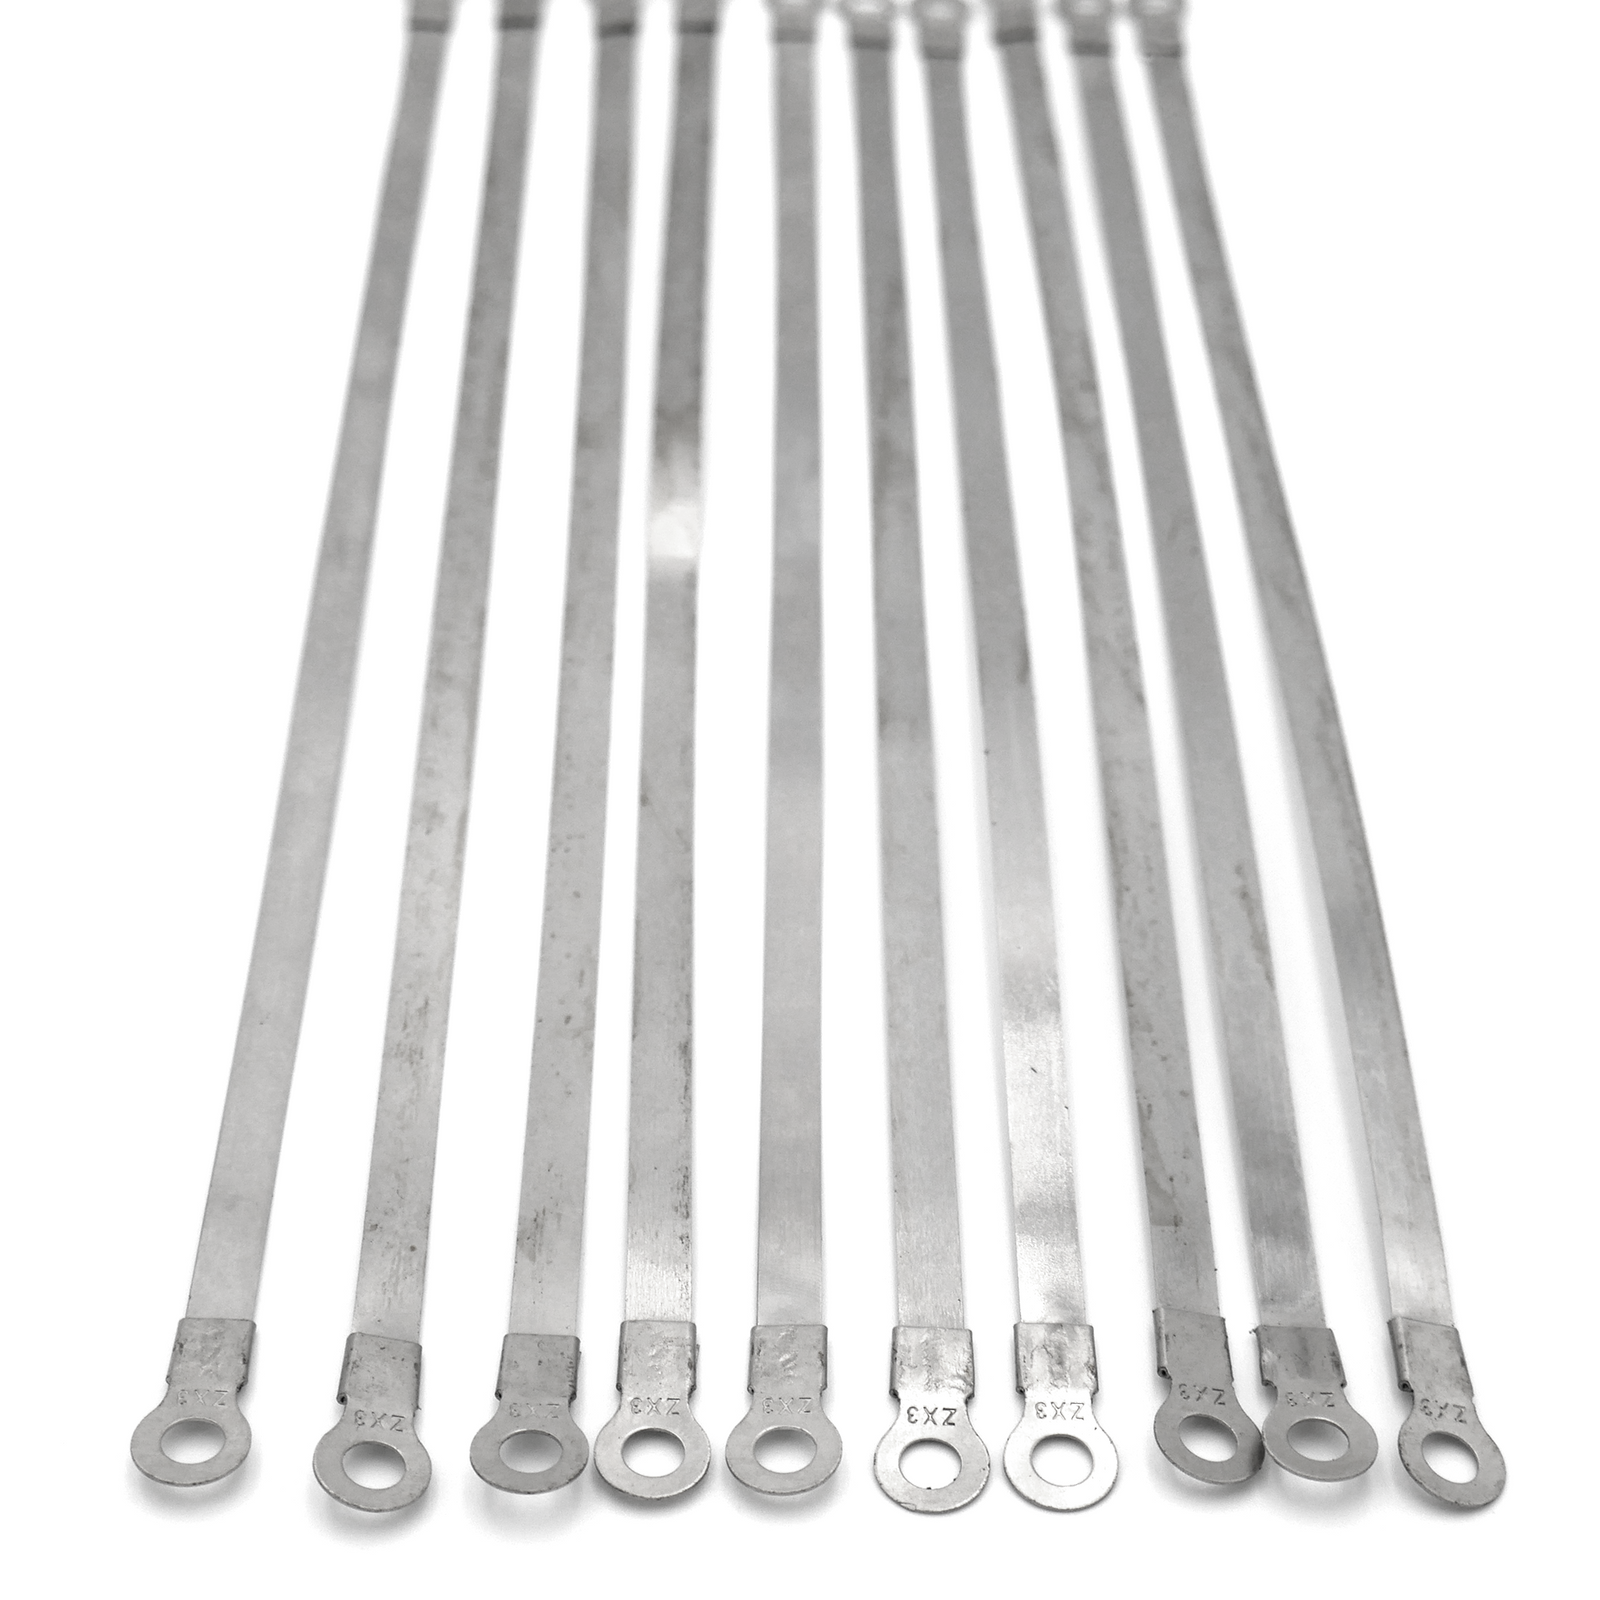 Pack of 10 heating elements